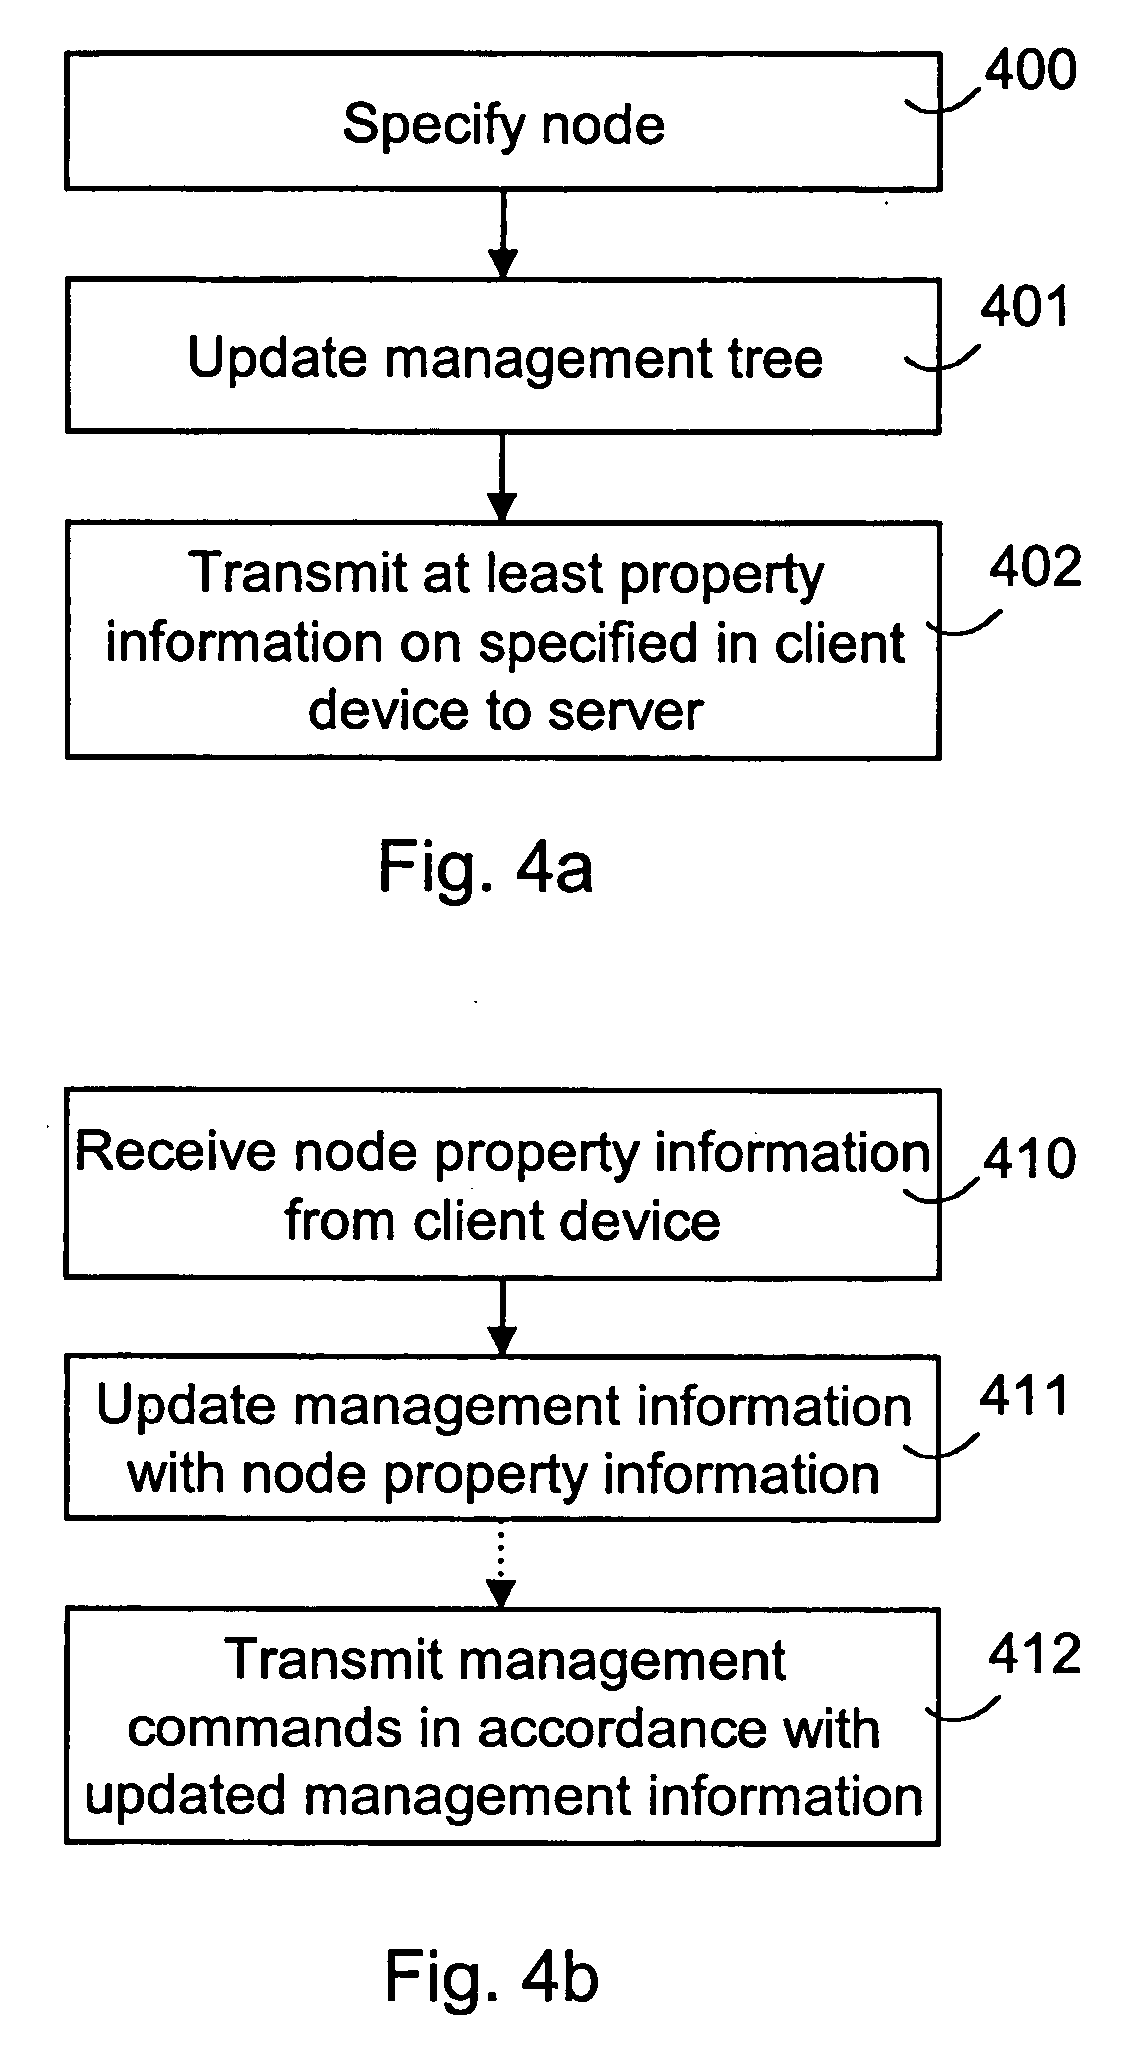 Specifying management nodes in a device management system